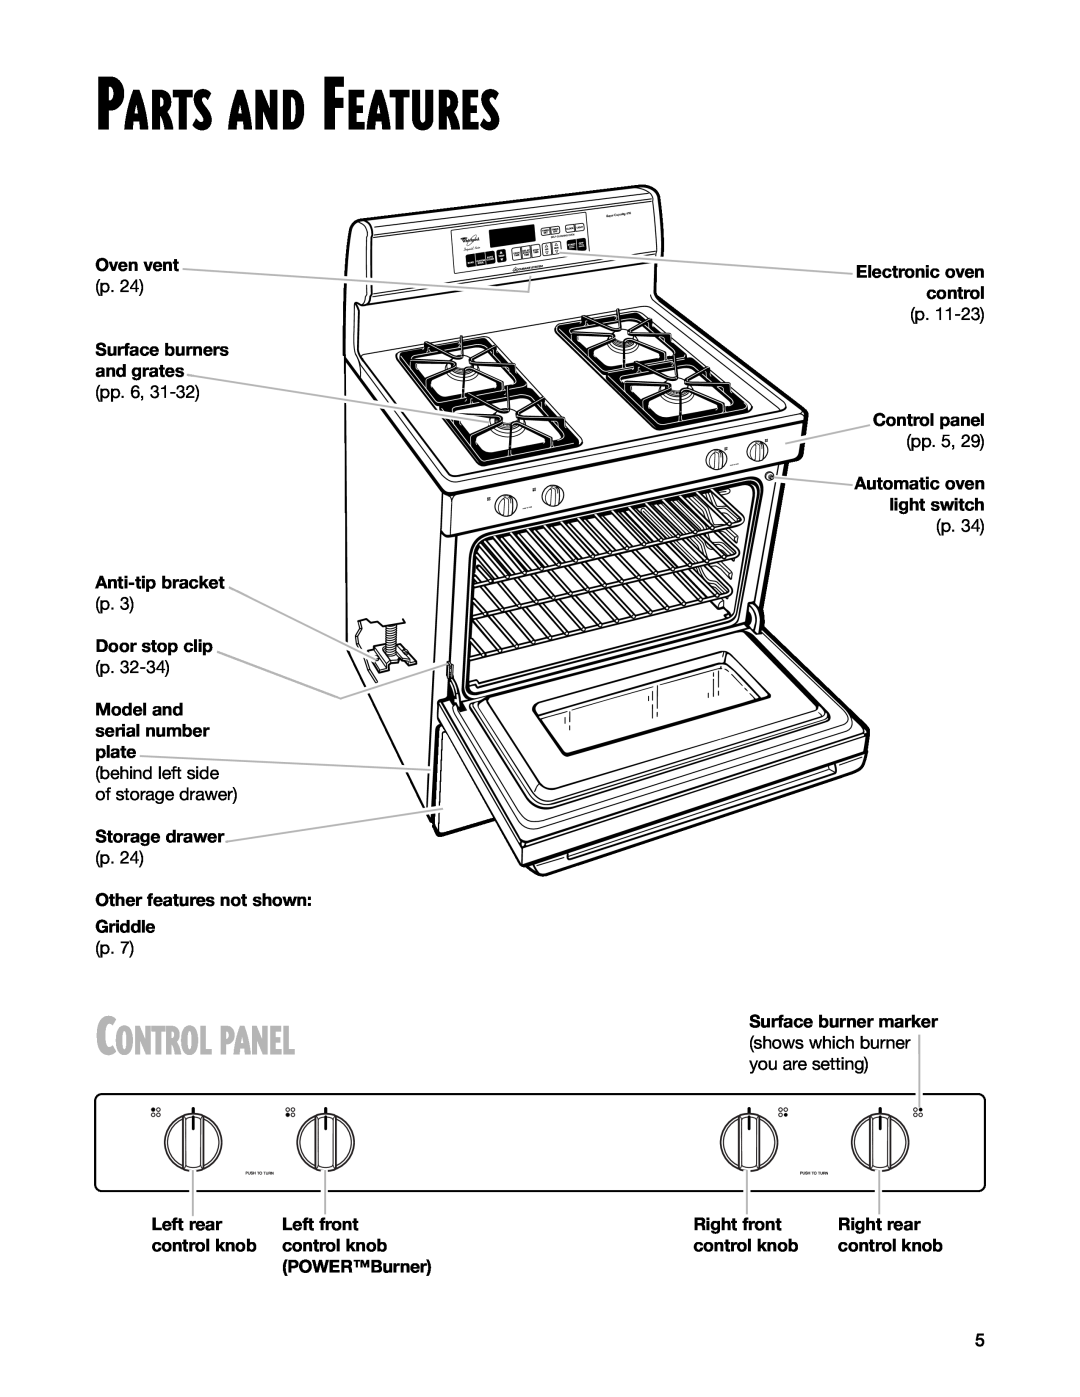 Whirlpool SF195LEH Control Panel, Parts And Features, Oven vent, Surface burners and grates pp, Griddle p, Left rear 